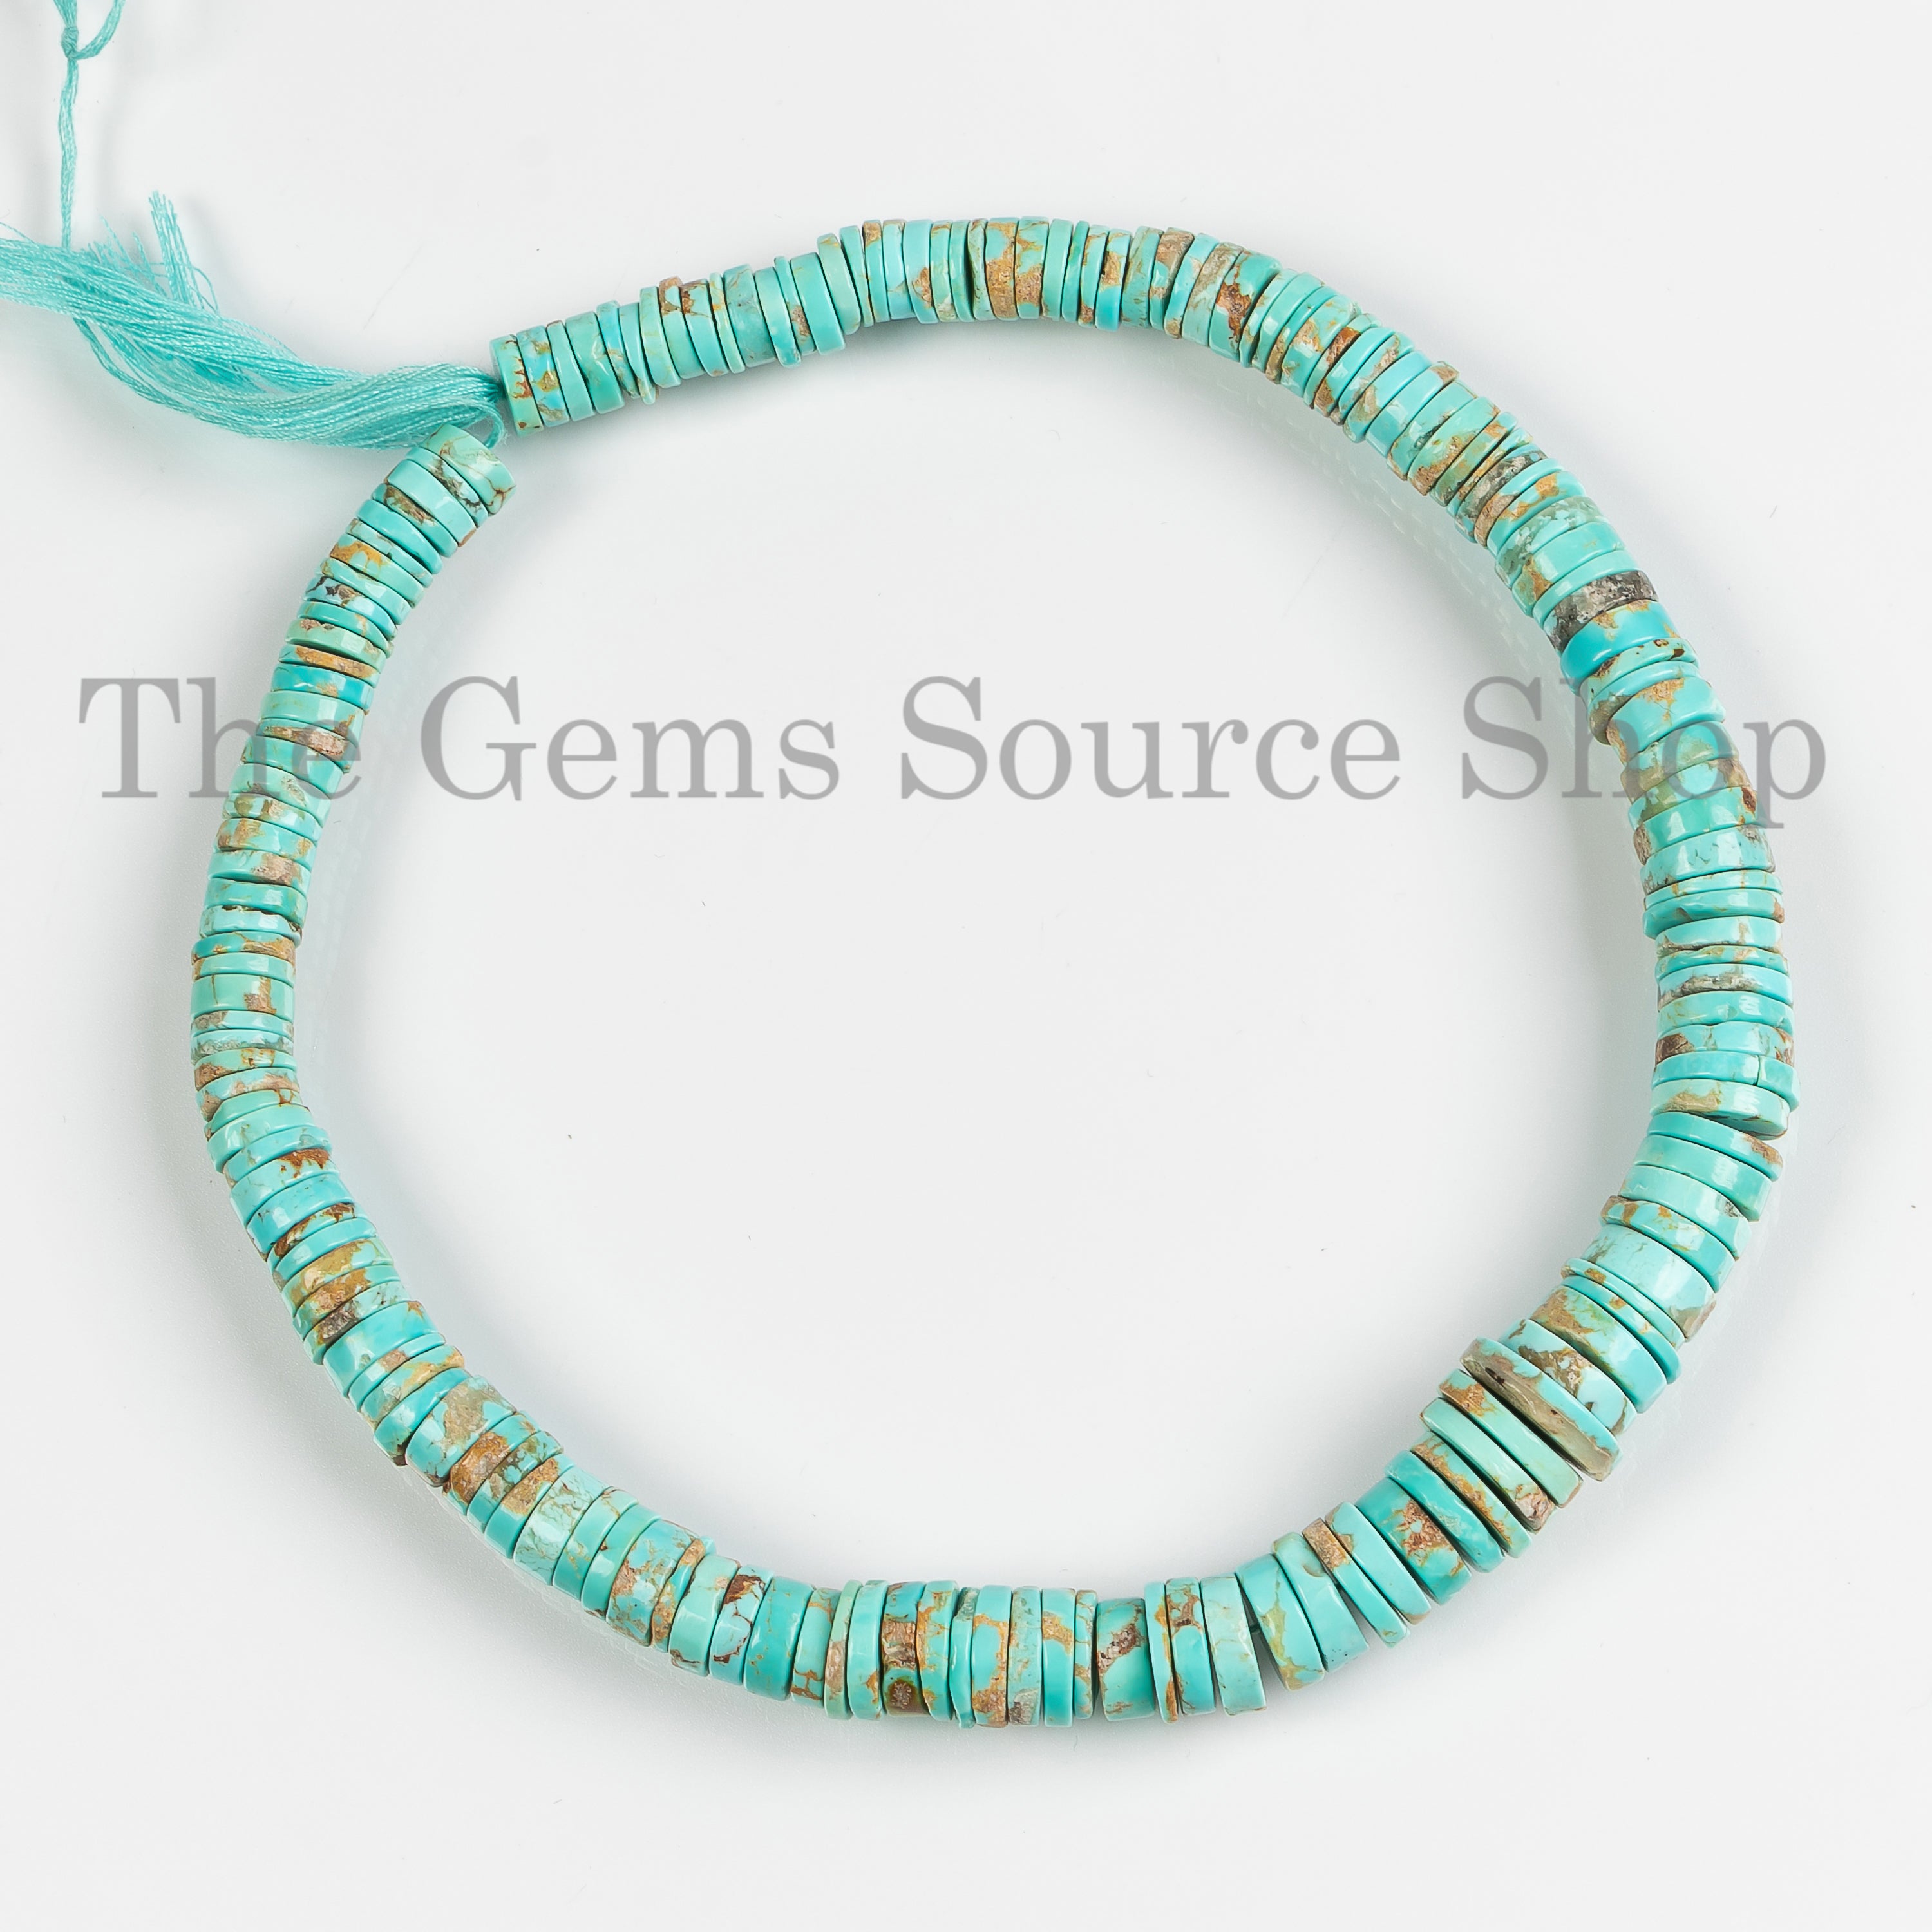 Turquoise Tyre Shape Beads, Turquoise Plain Beads, 8.5-14mm Turquoise Beads, Turquoise Tyre Beads, Tyre Beads, Smooth Turquoise Beads